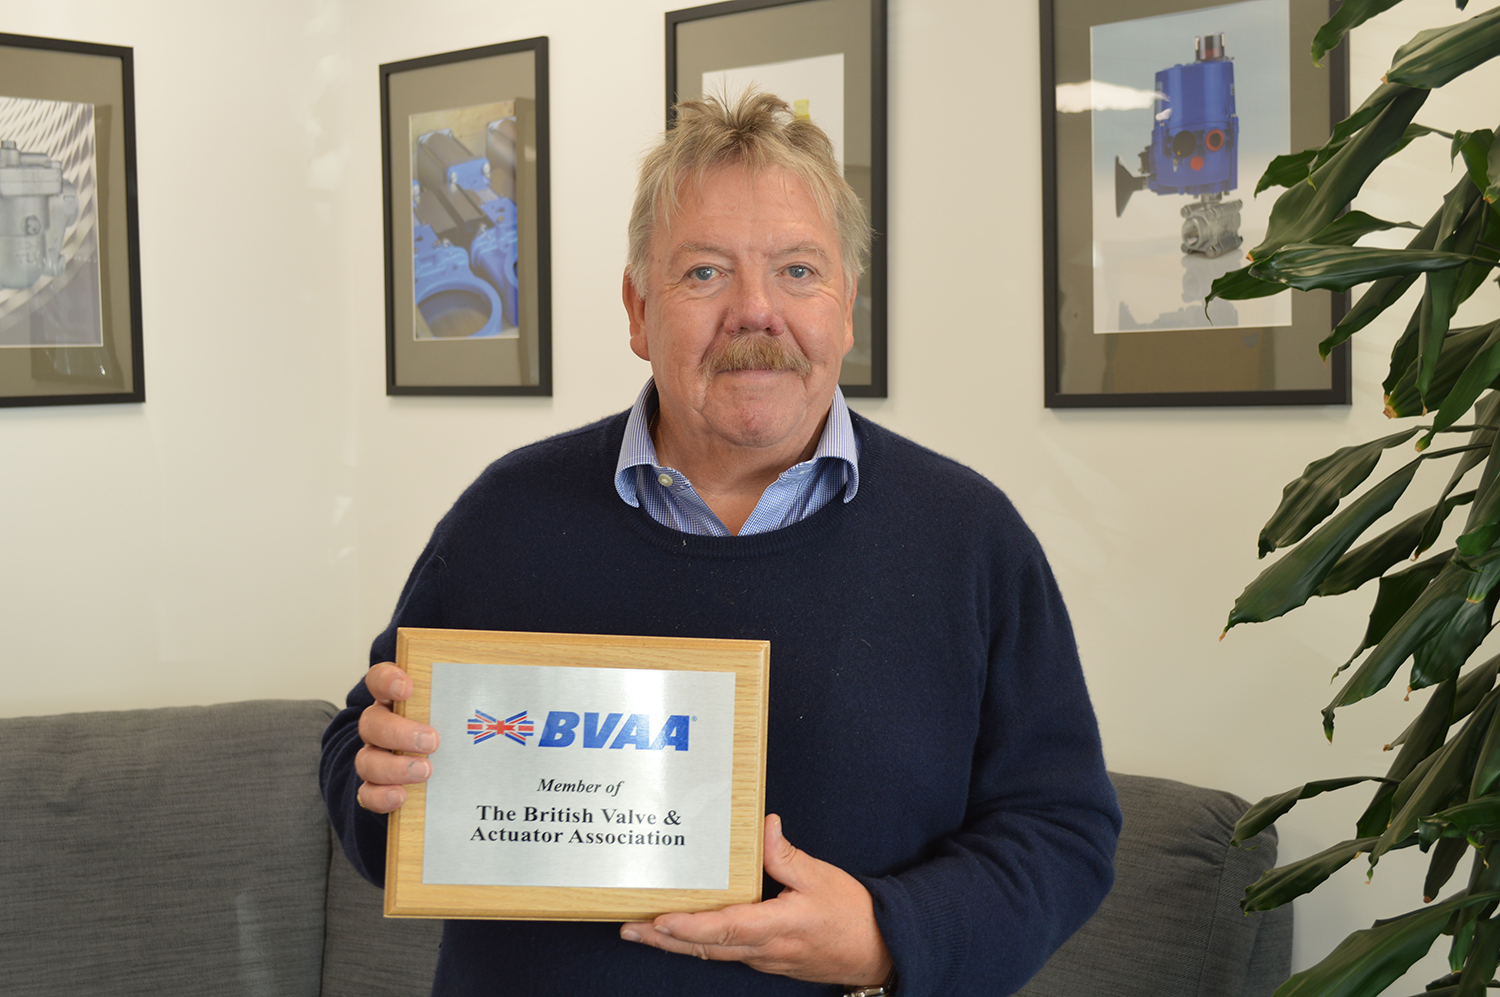 Gary Hopkinson, the founder of Valves Online is planned to retire at the end of this year.